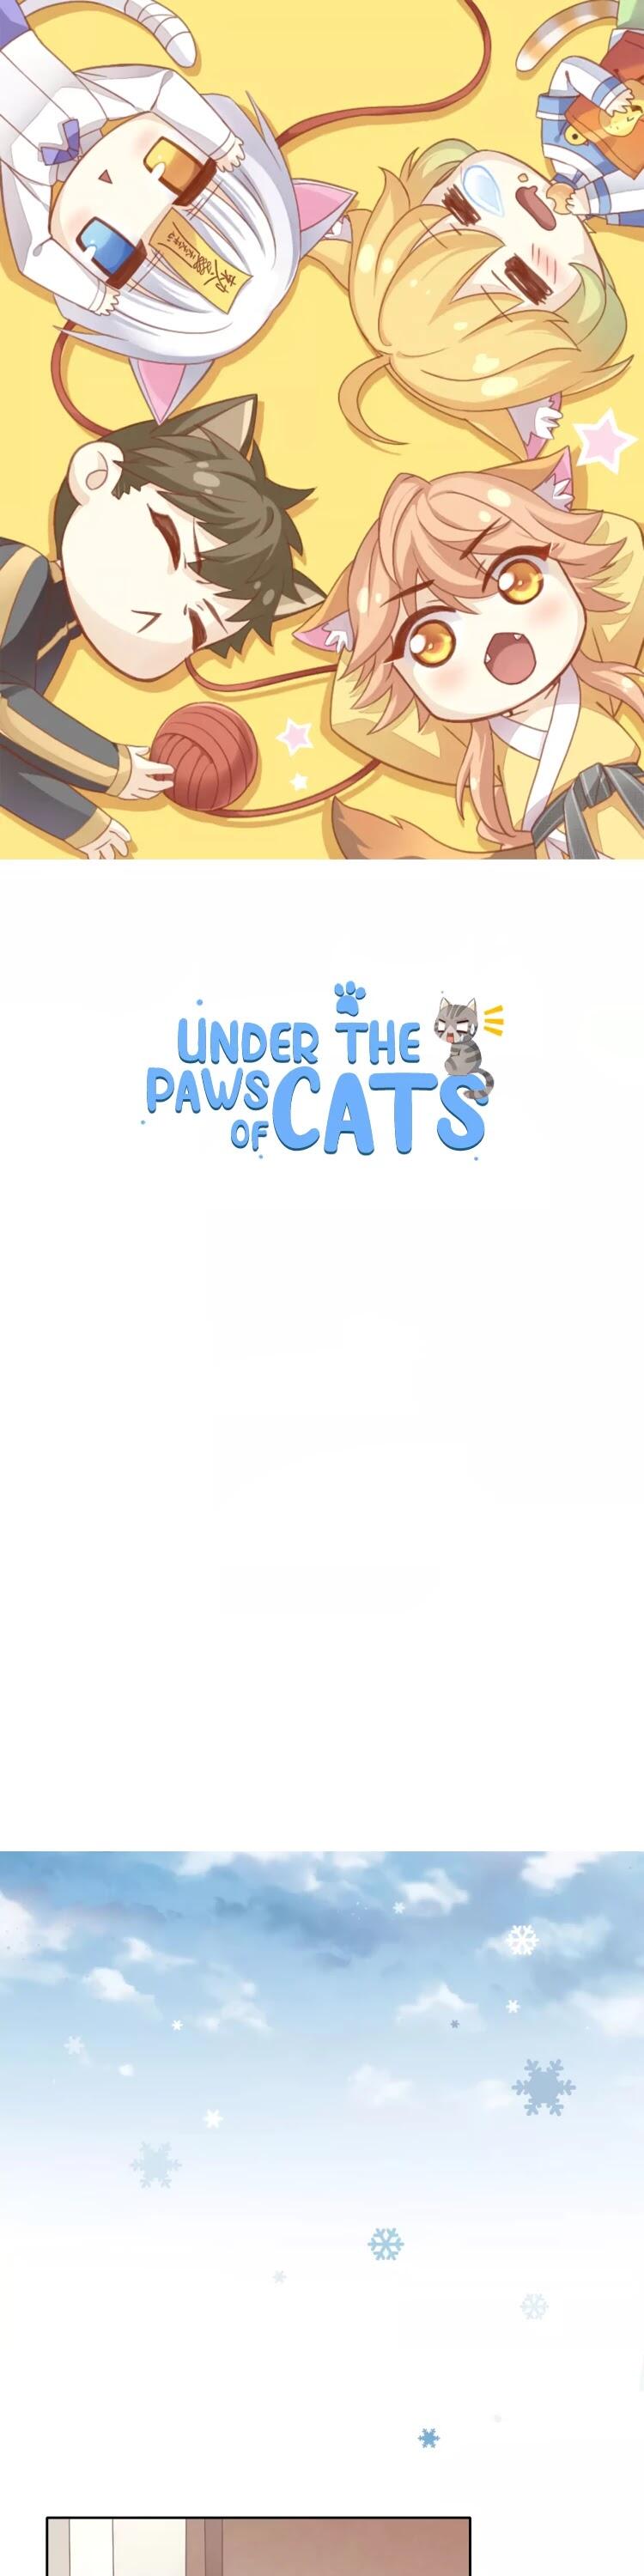 Under The Paws Of Cats Chapter 34 page 2 - Mangakakalots.com